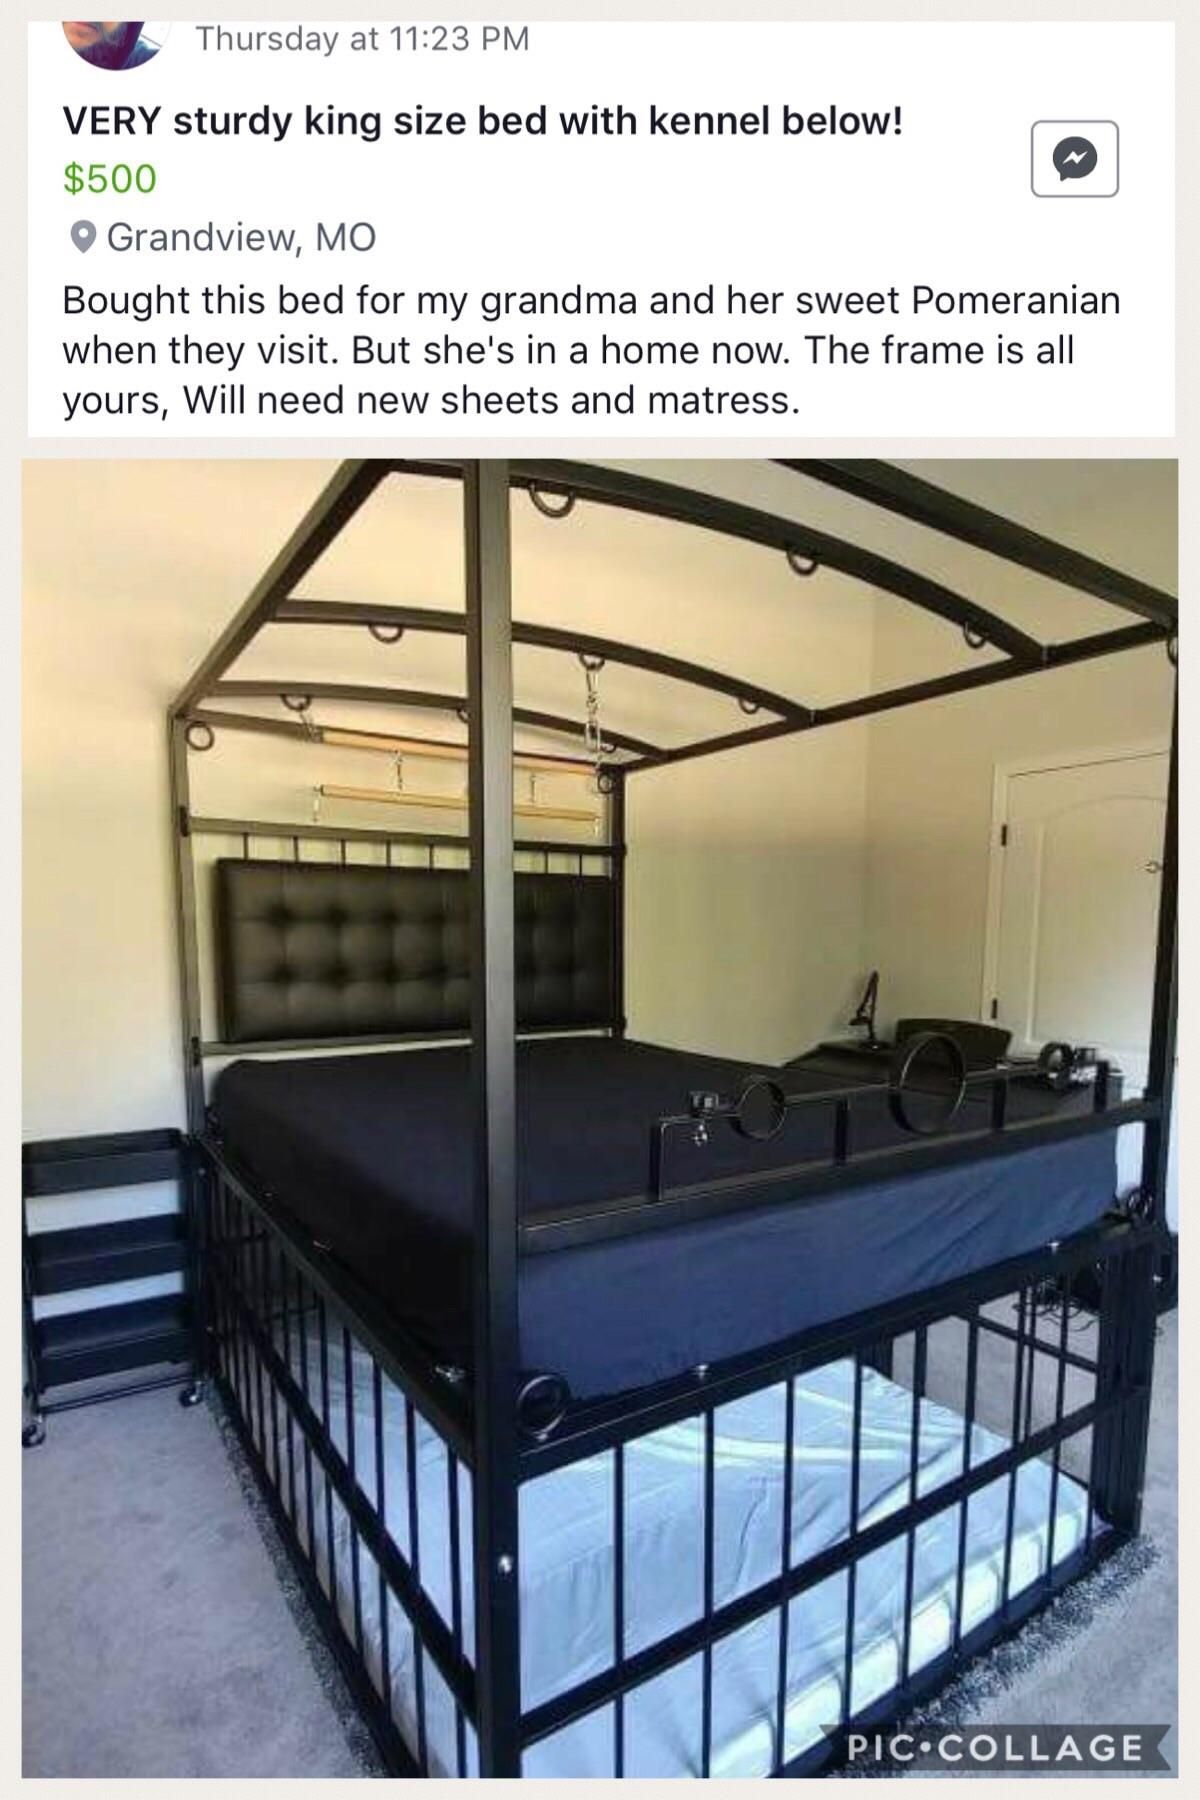 sad but cool picture of a bed that also holds a dog but the owner is in a retirement home now so the bed is for sale